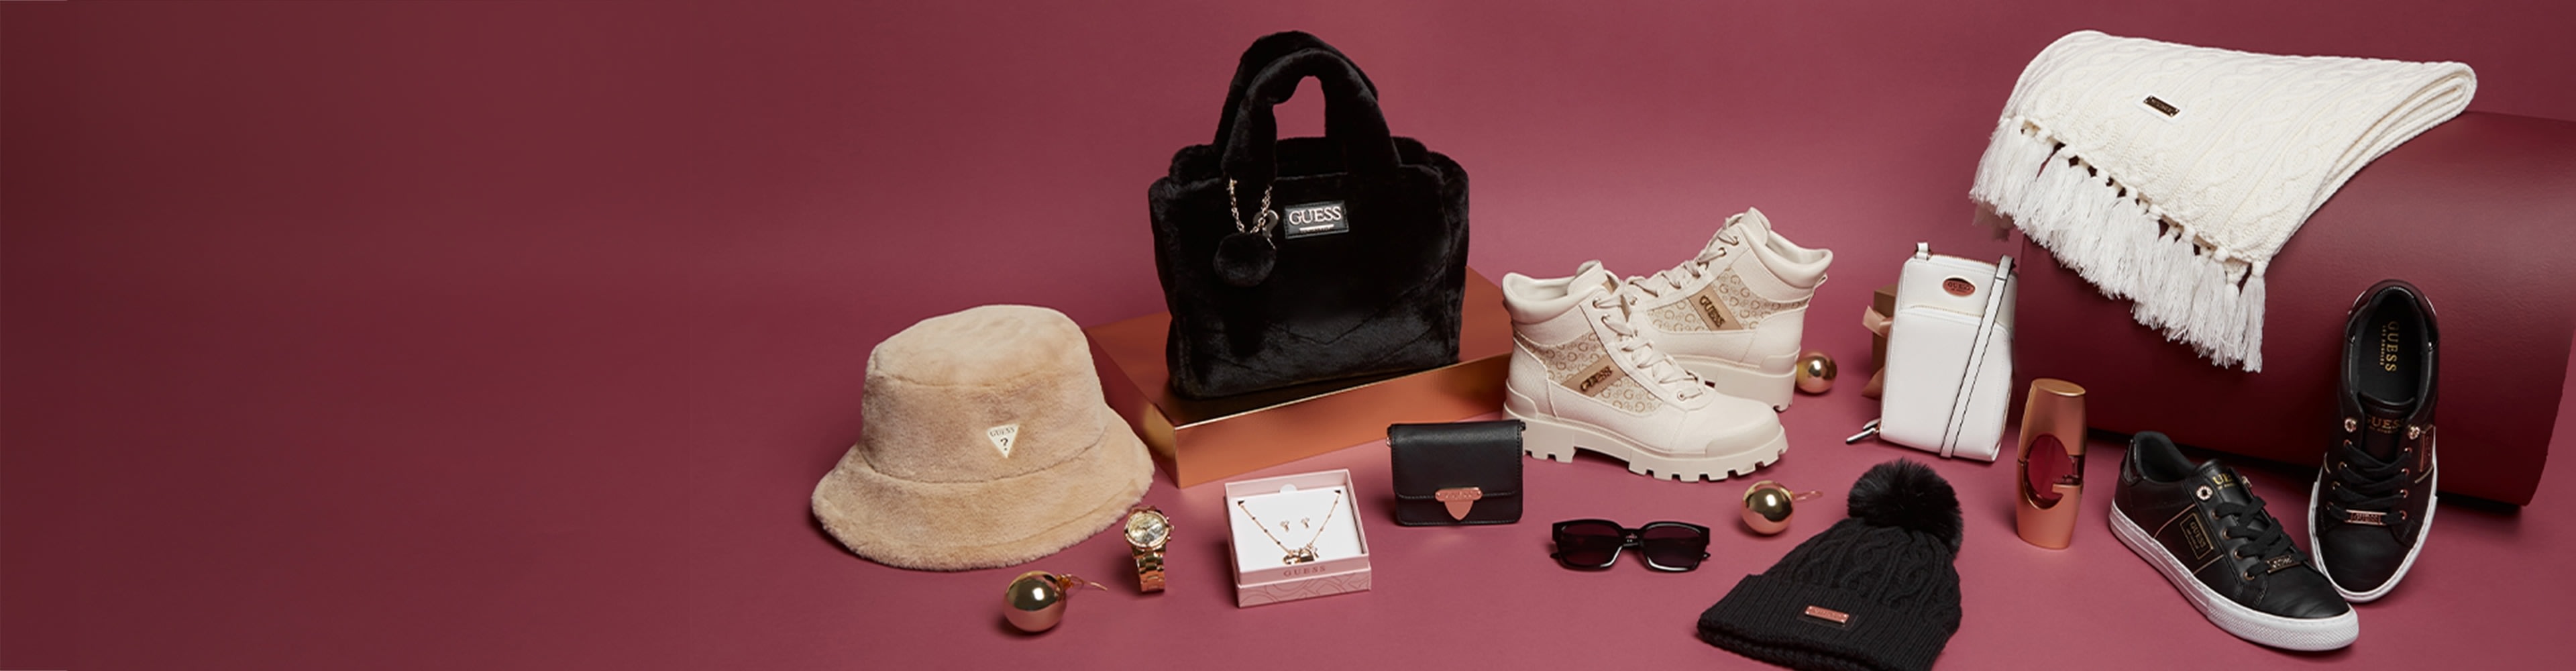 shop the holiday gift guide presents for her